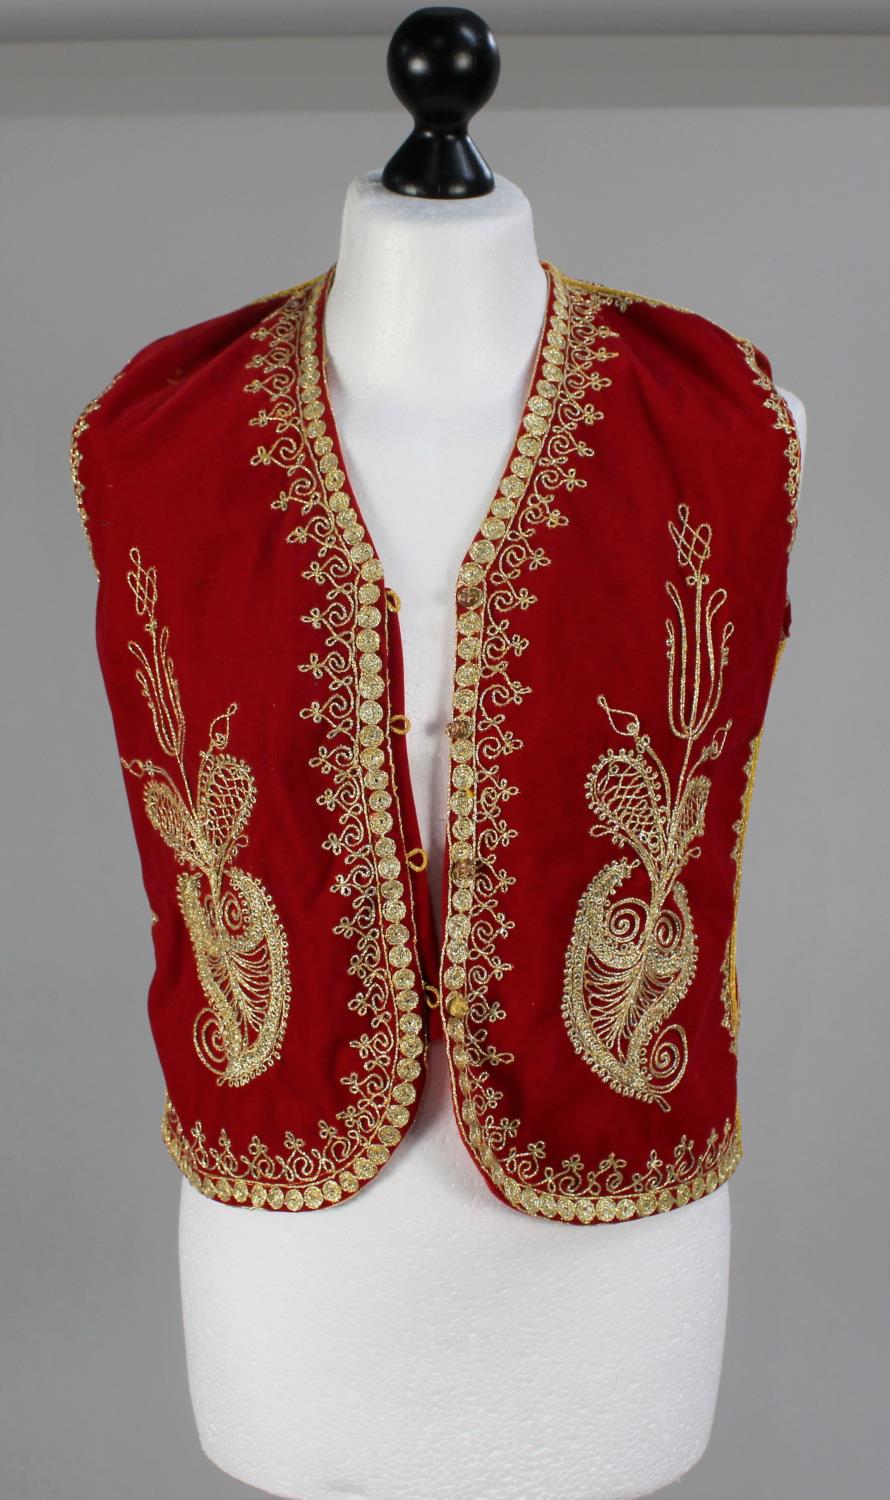 An Embroidered Chinese Waistcoat - Image 2 of 3